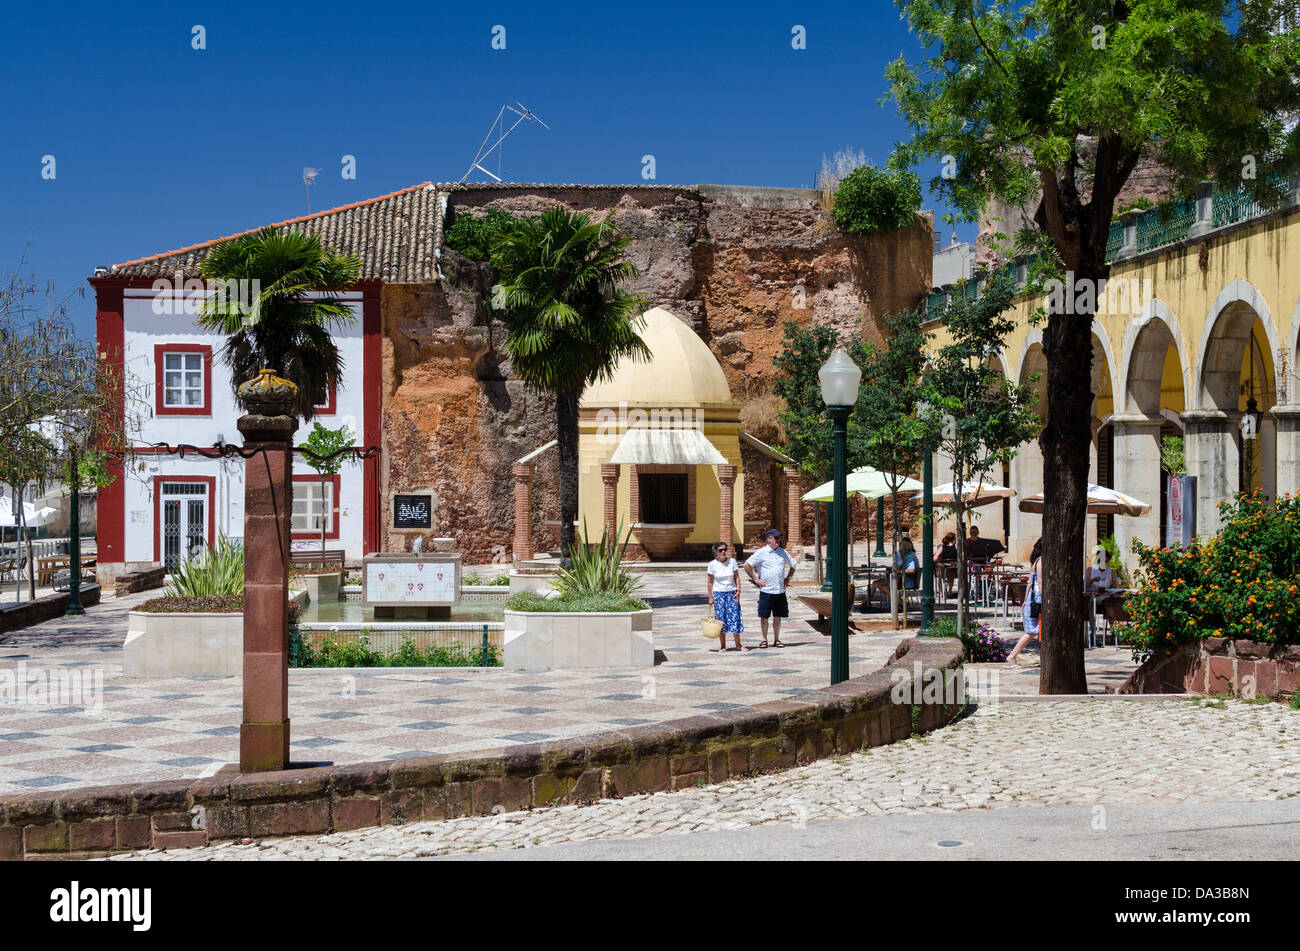 Praca Municipio - the Municipal Square in the ancient town of Silves in Portugal Stock Photo